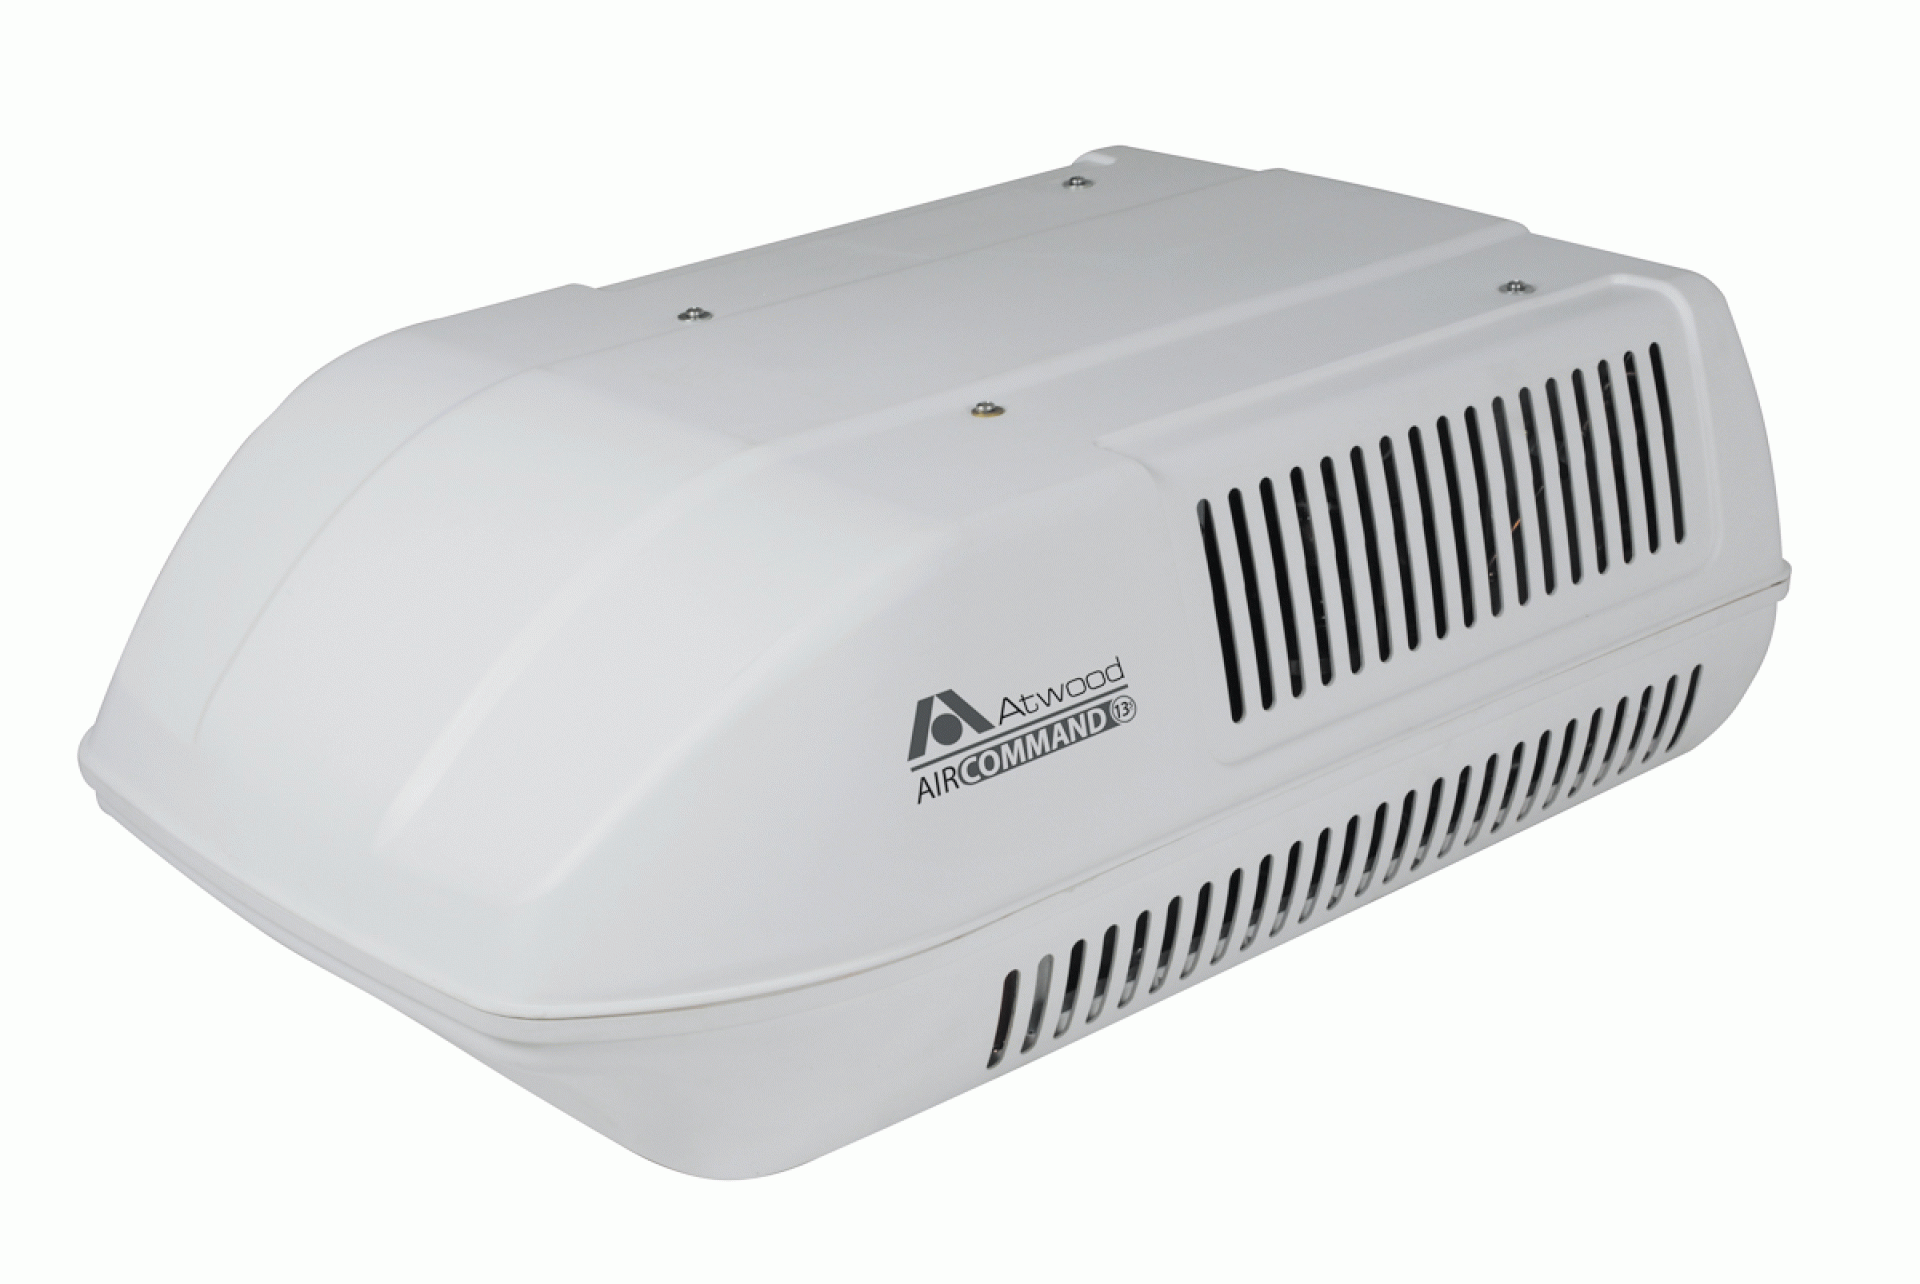 ATWOOD MOBILE PRODUCTS LLC | 15027 | AIR CONDITIONER 13 500 BTU DUCTED - COOL ONLY